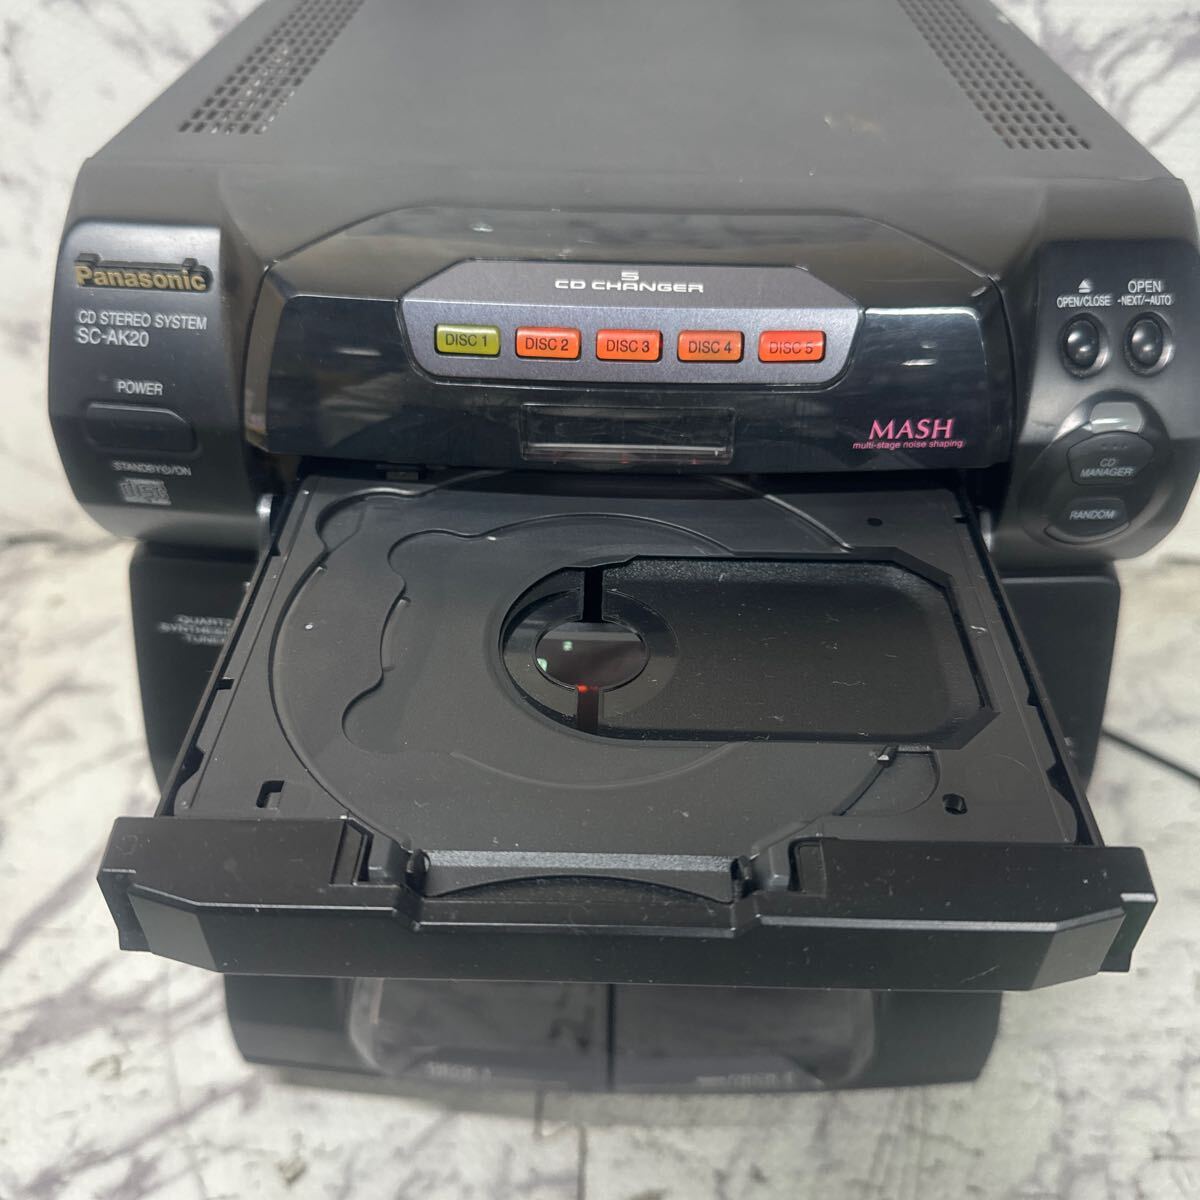 MYM4-296 super-discount Panasonic CD STEREO SYSTEM SC-AK20 mini component electrification OK used present condition goods *3 times re-exhibition . liquidation 